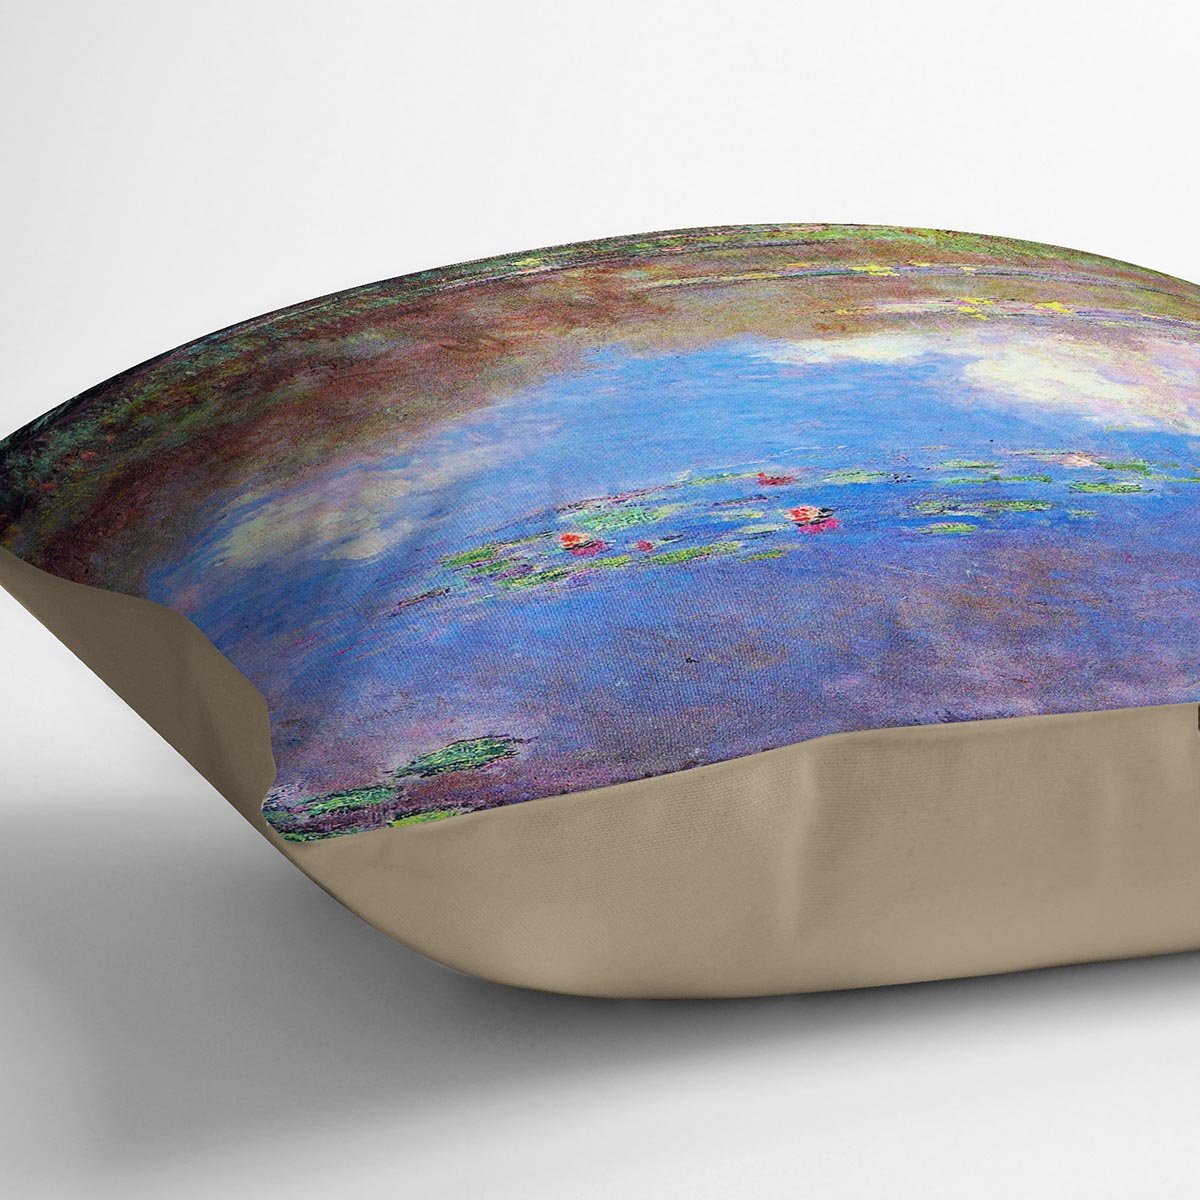 Water Lily Pond 4 by Monet Throw Pillow